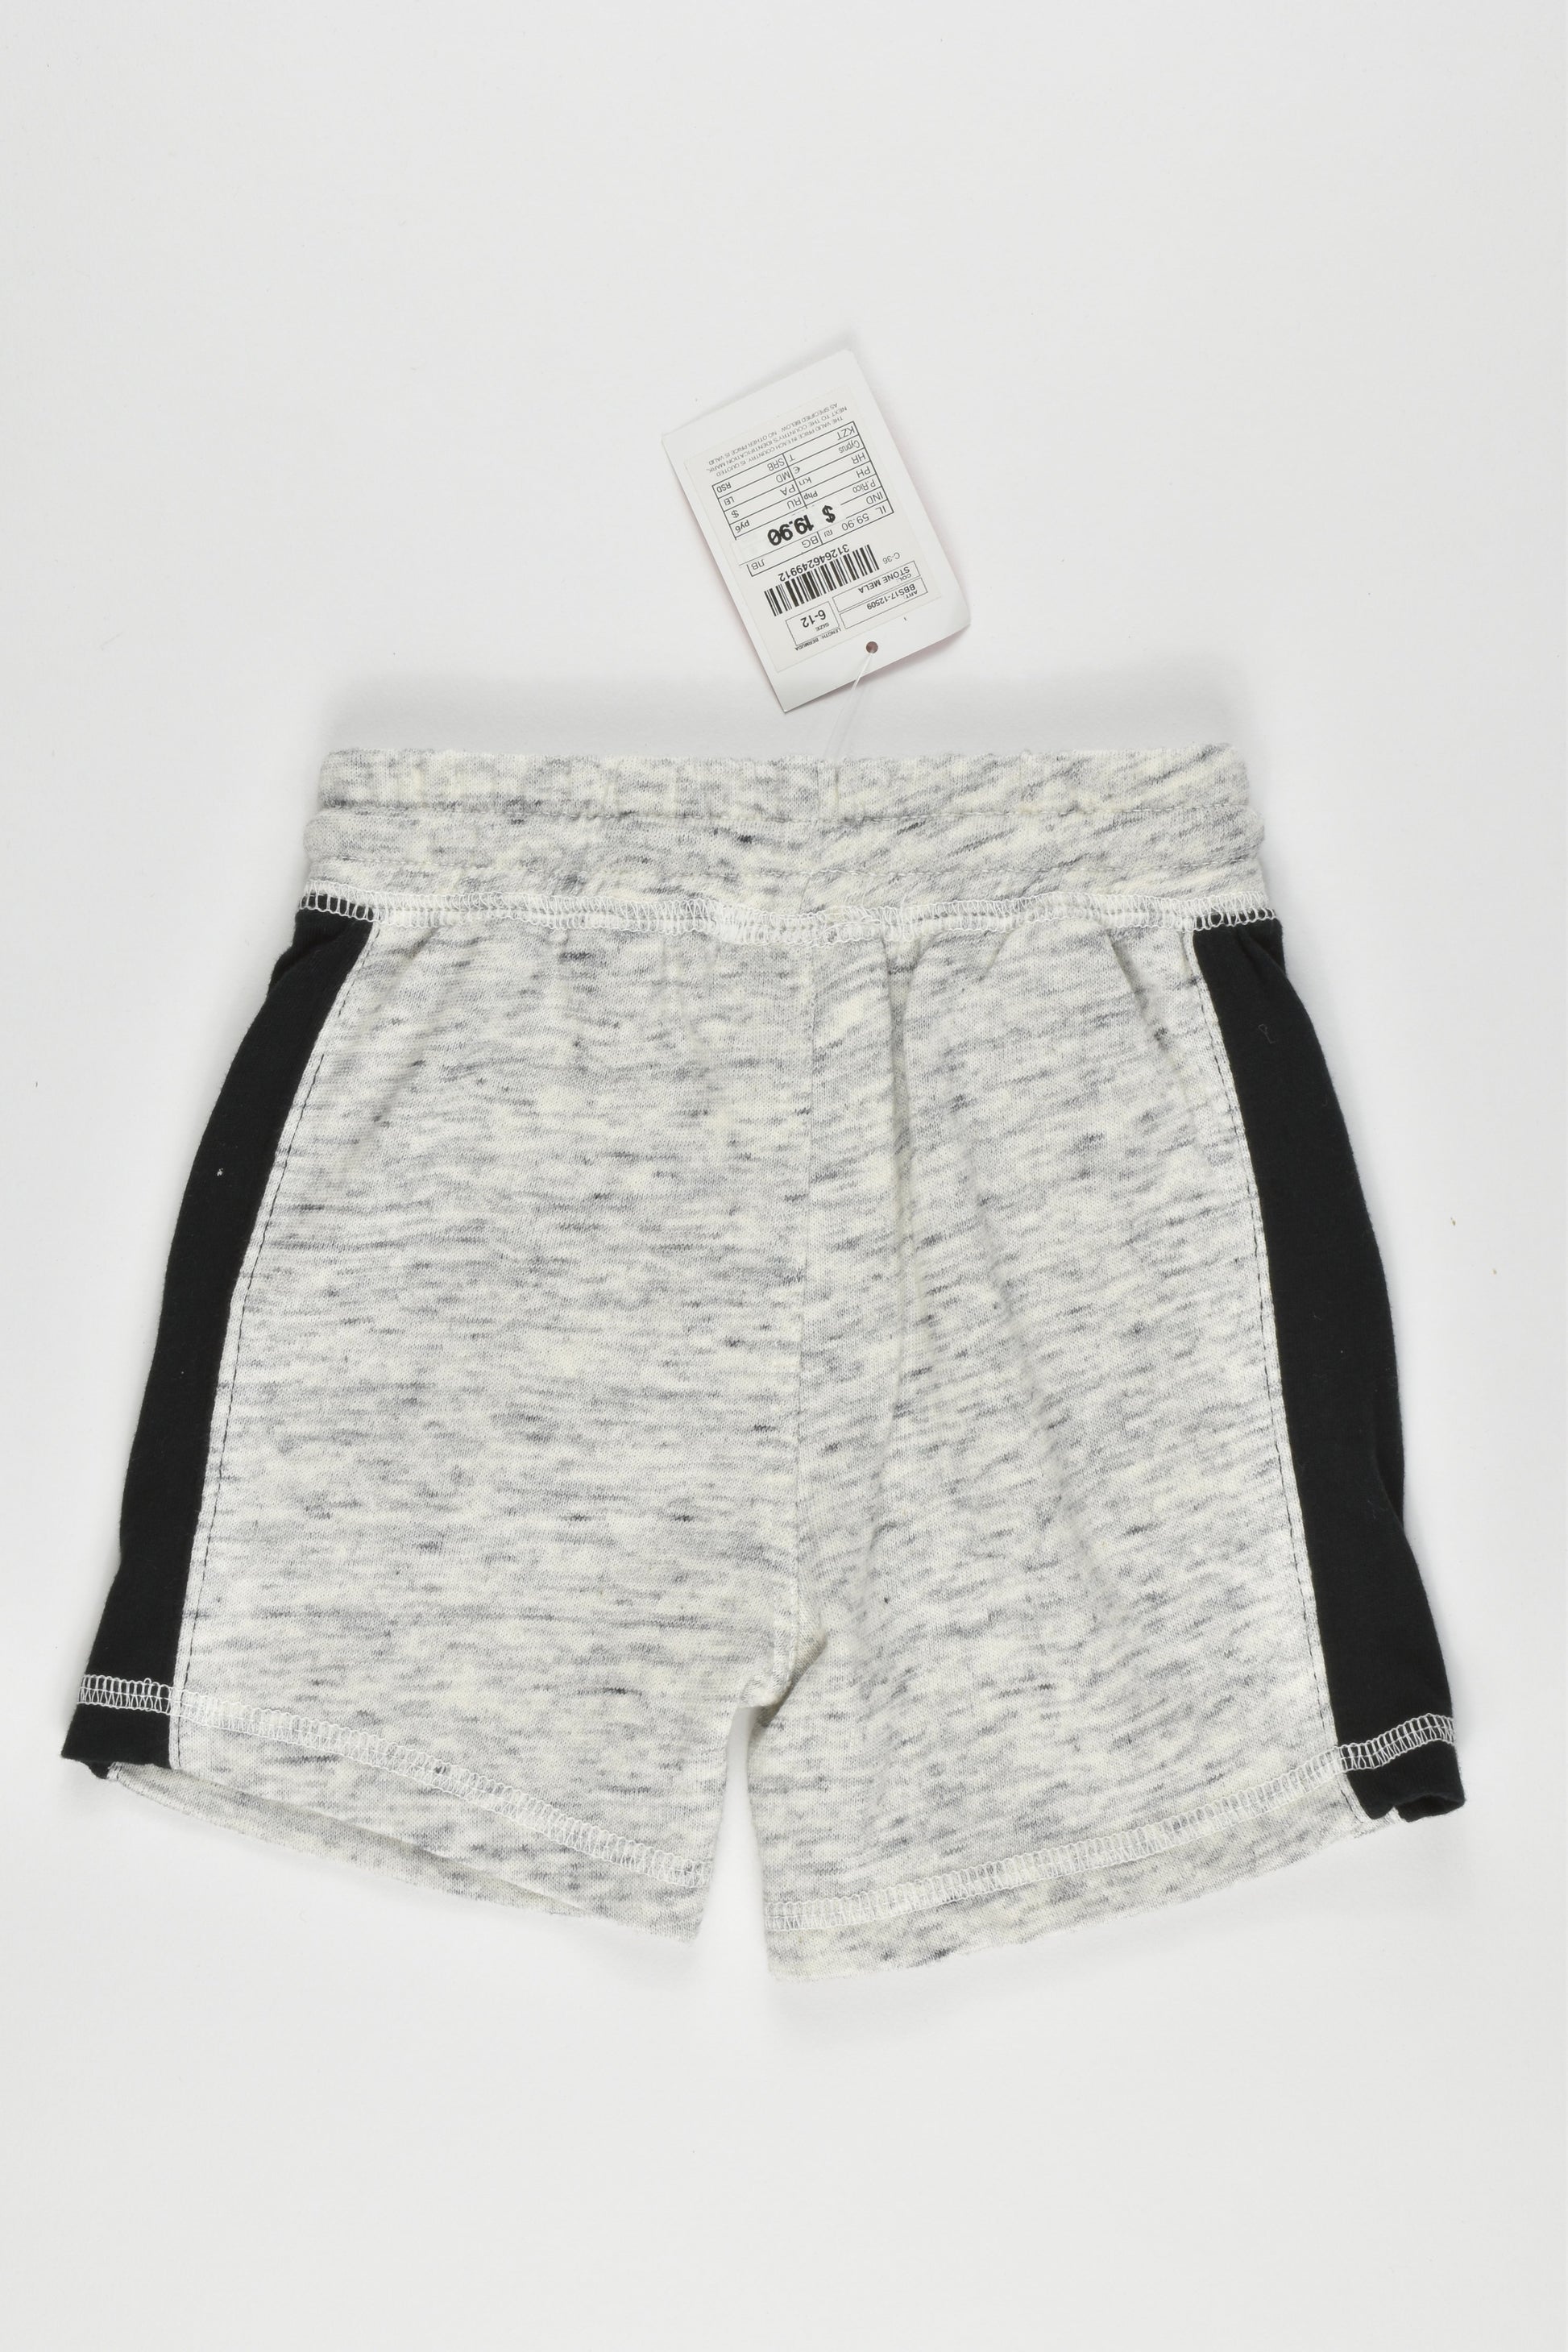 NEW Fox Size 0 (6-12 months) Shorts